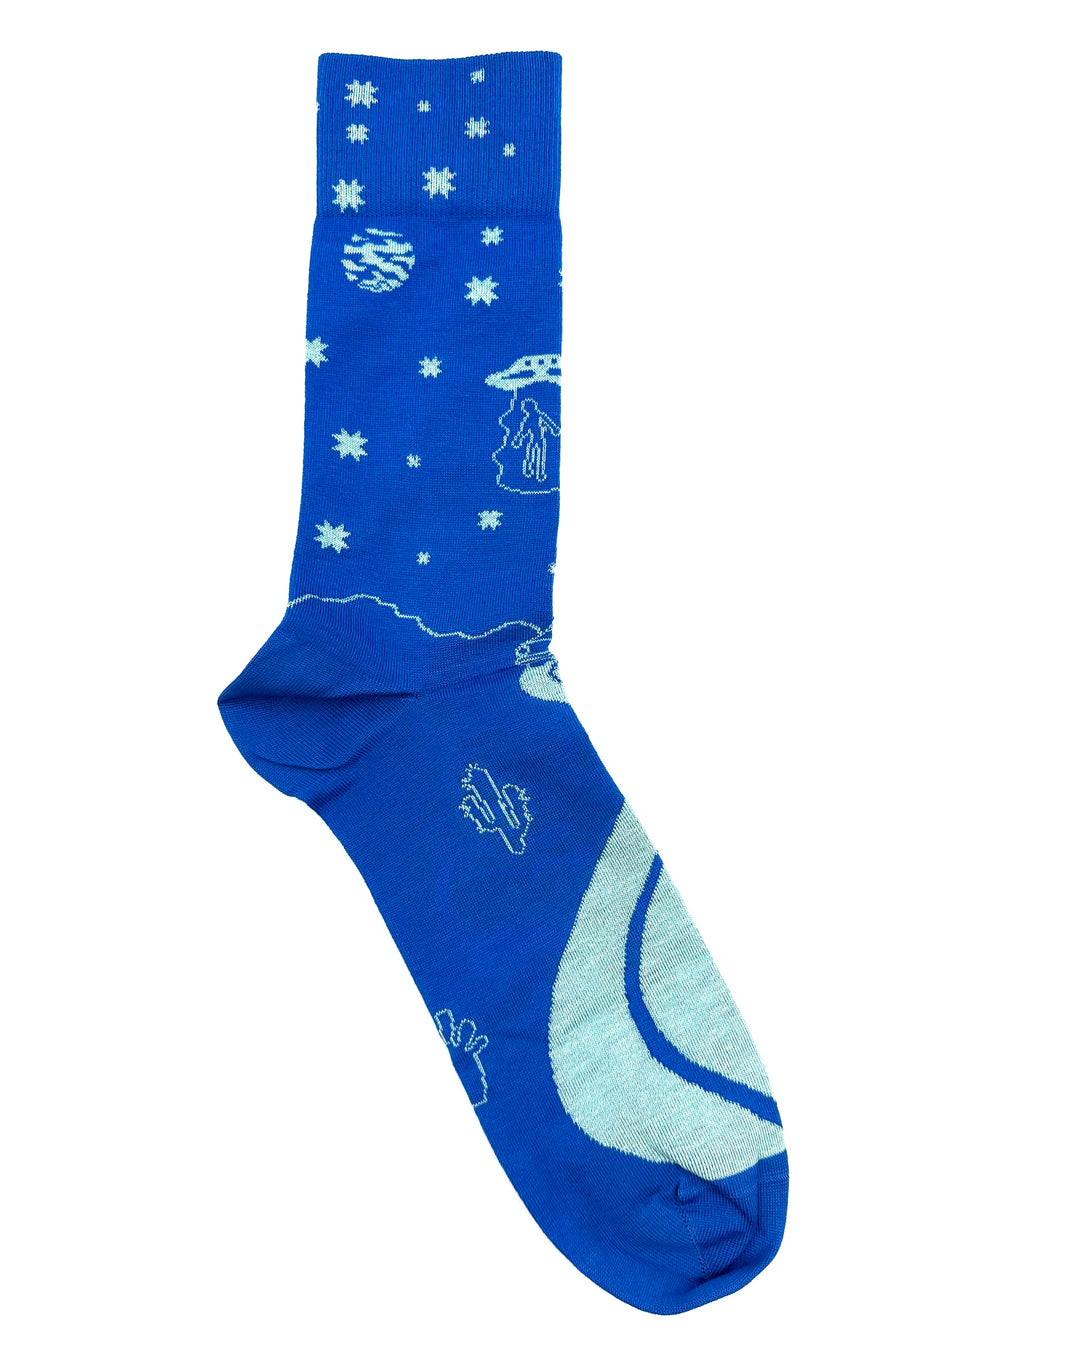 Blue Night Time Desert Socks - Mens Size 6 1/2 - 9 And Size 9 1/2 - 12